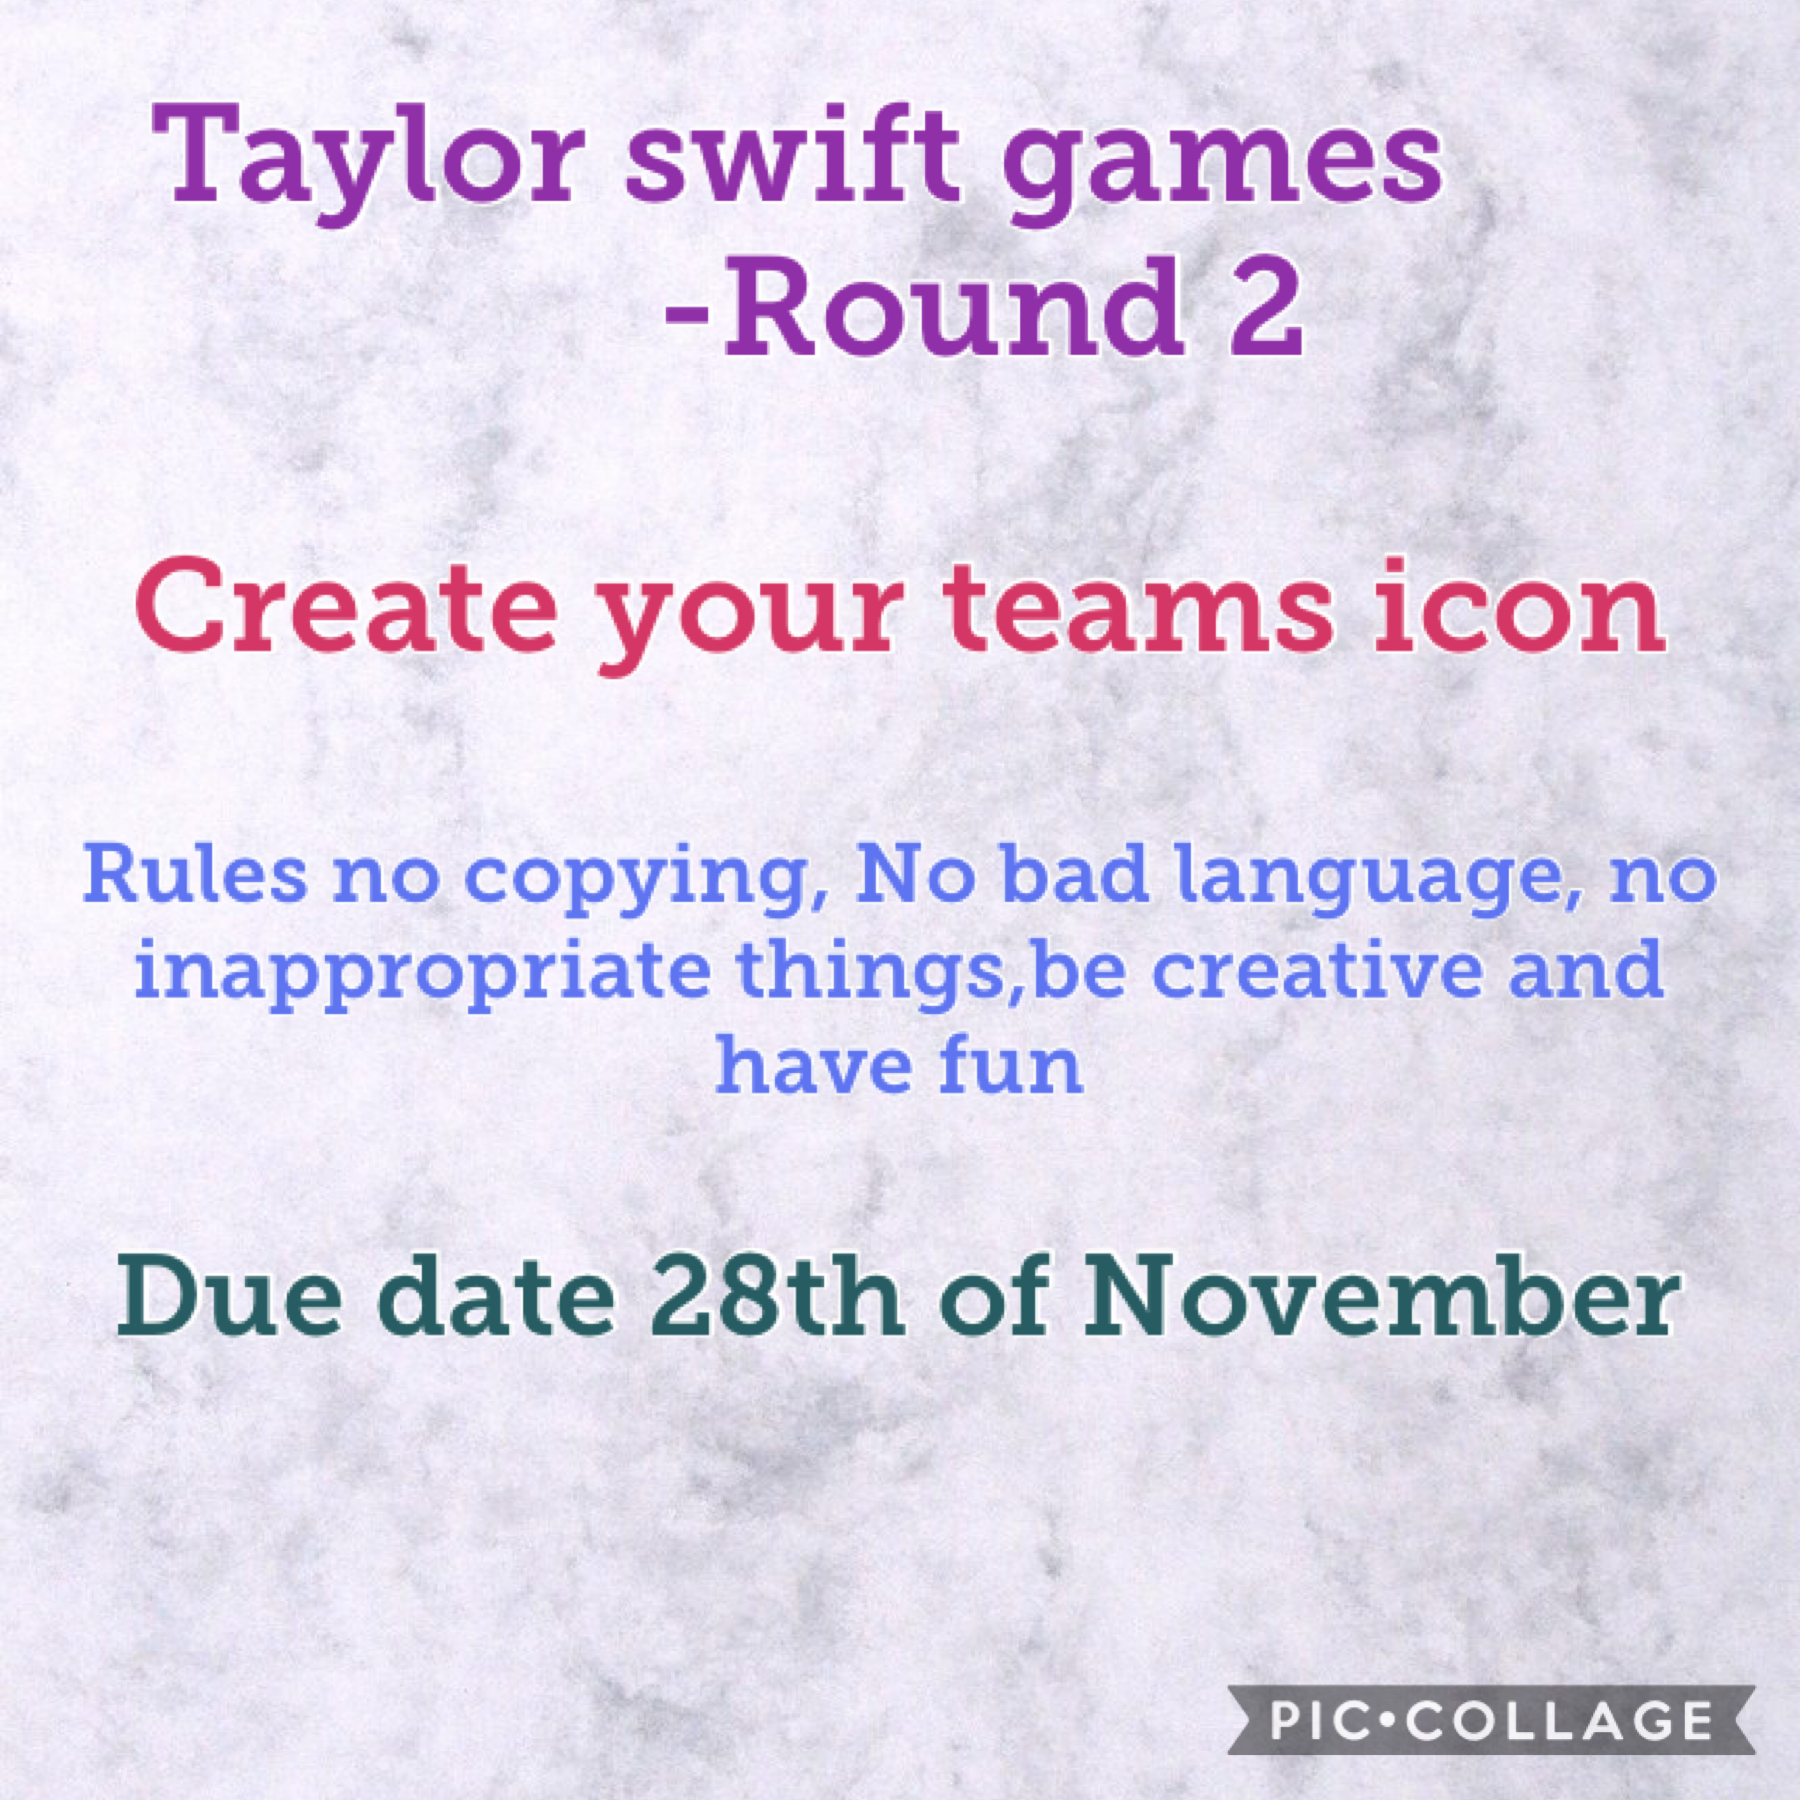 Round 2 of the Taylor Swift games 